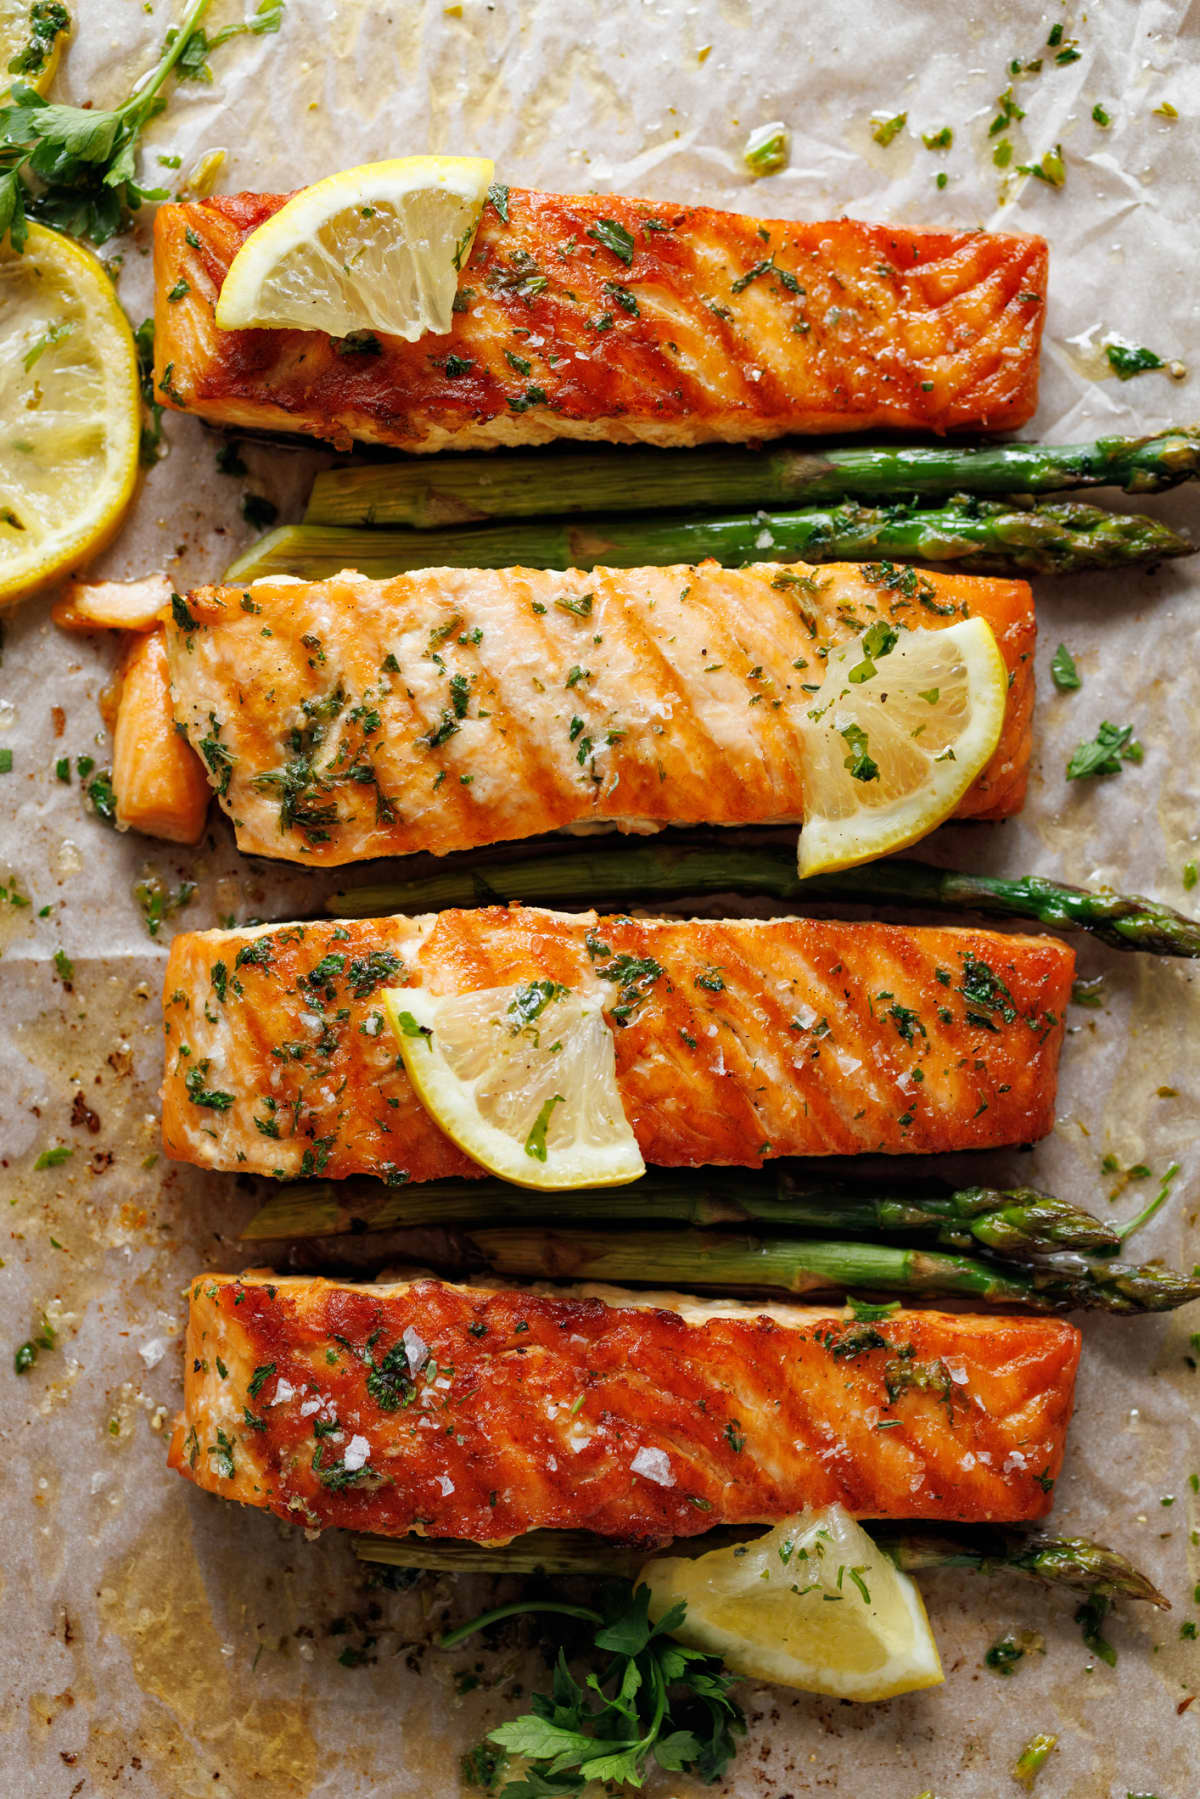 Grilled portions of salmon and green asparagus with lemon slices and herbs, top view